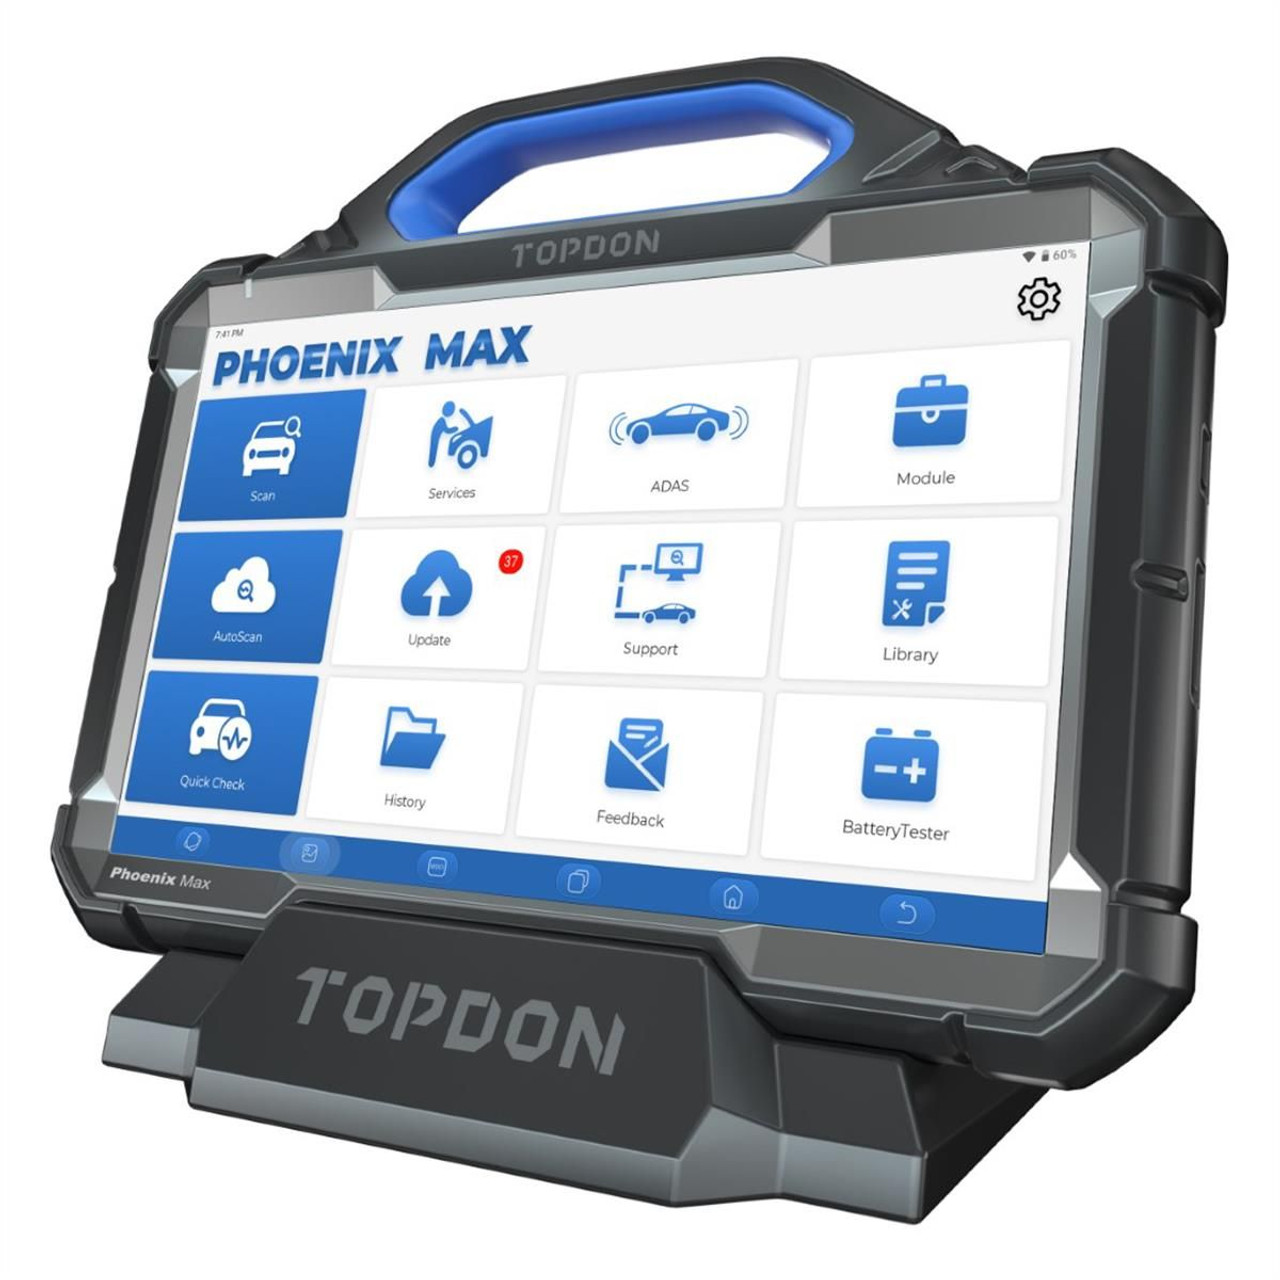 TOPDON Phoenix Max - 13.3 OE-Level Scan Tool, Docking Station, Cloud-Based  Programming (TOPTD52110063) - Automotive Equipment Specialists